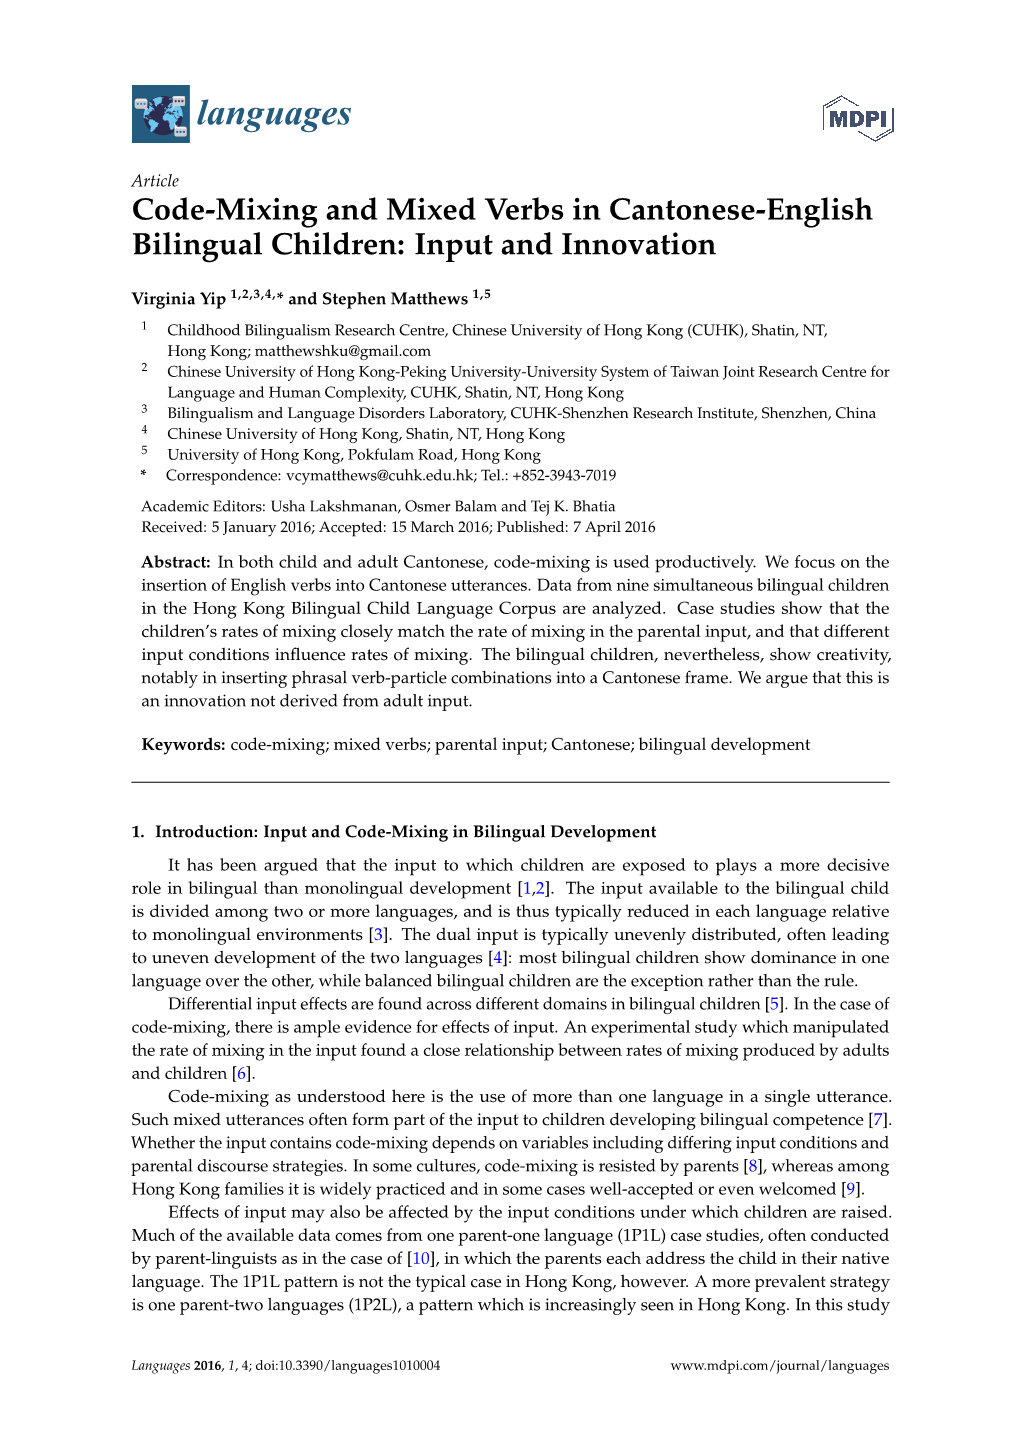 Code-Mixing and Mixed Verbs in Cantonese-English Bilingual Children: Input and Innovation